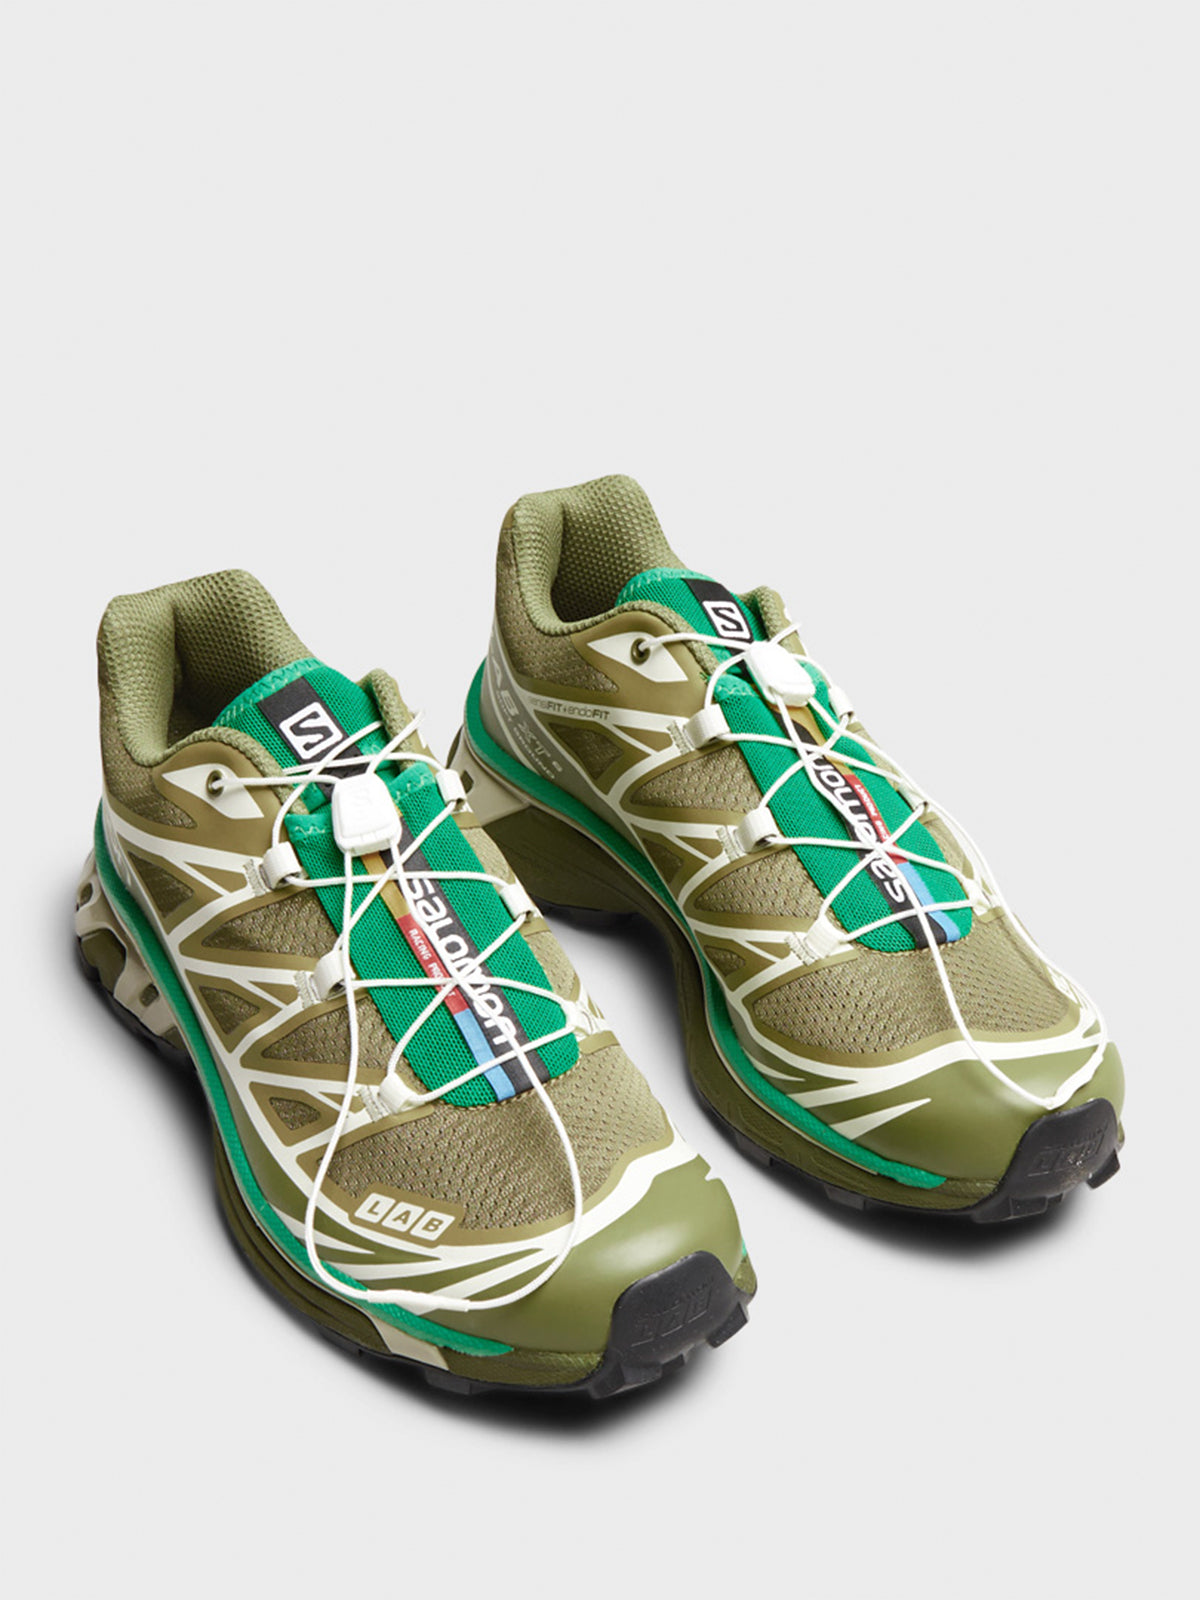 XT-6 Sneakers in Dried Herb, Deep Lichen Green and Bright Green